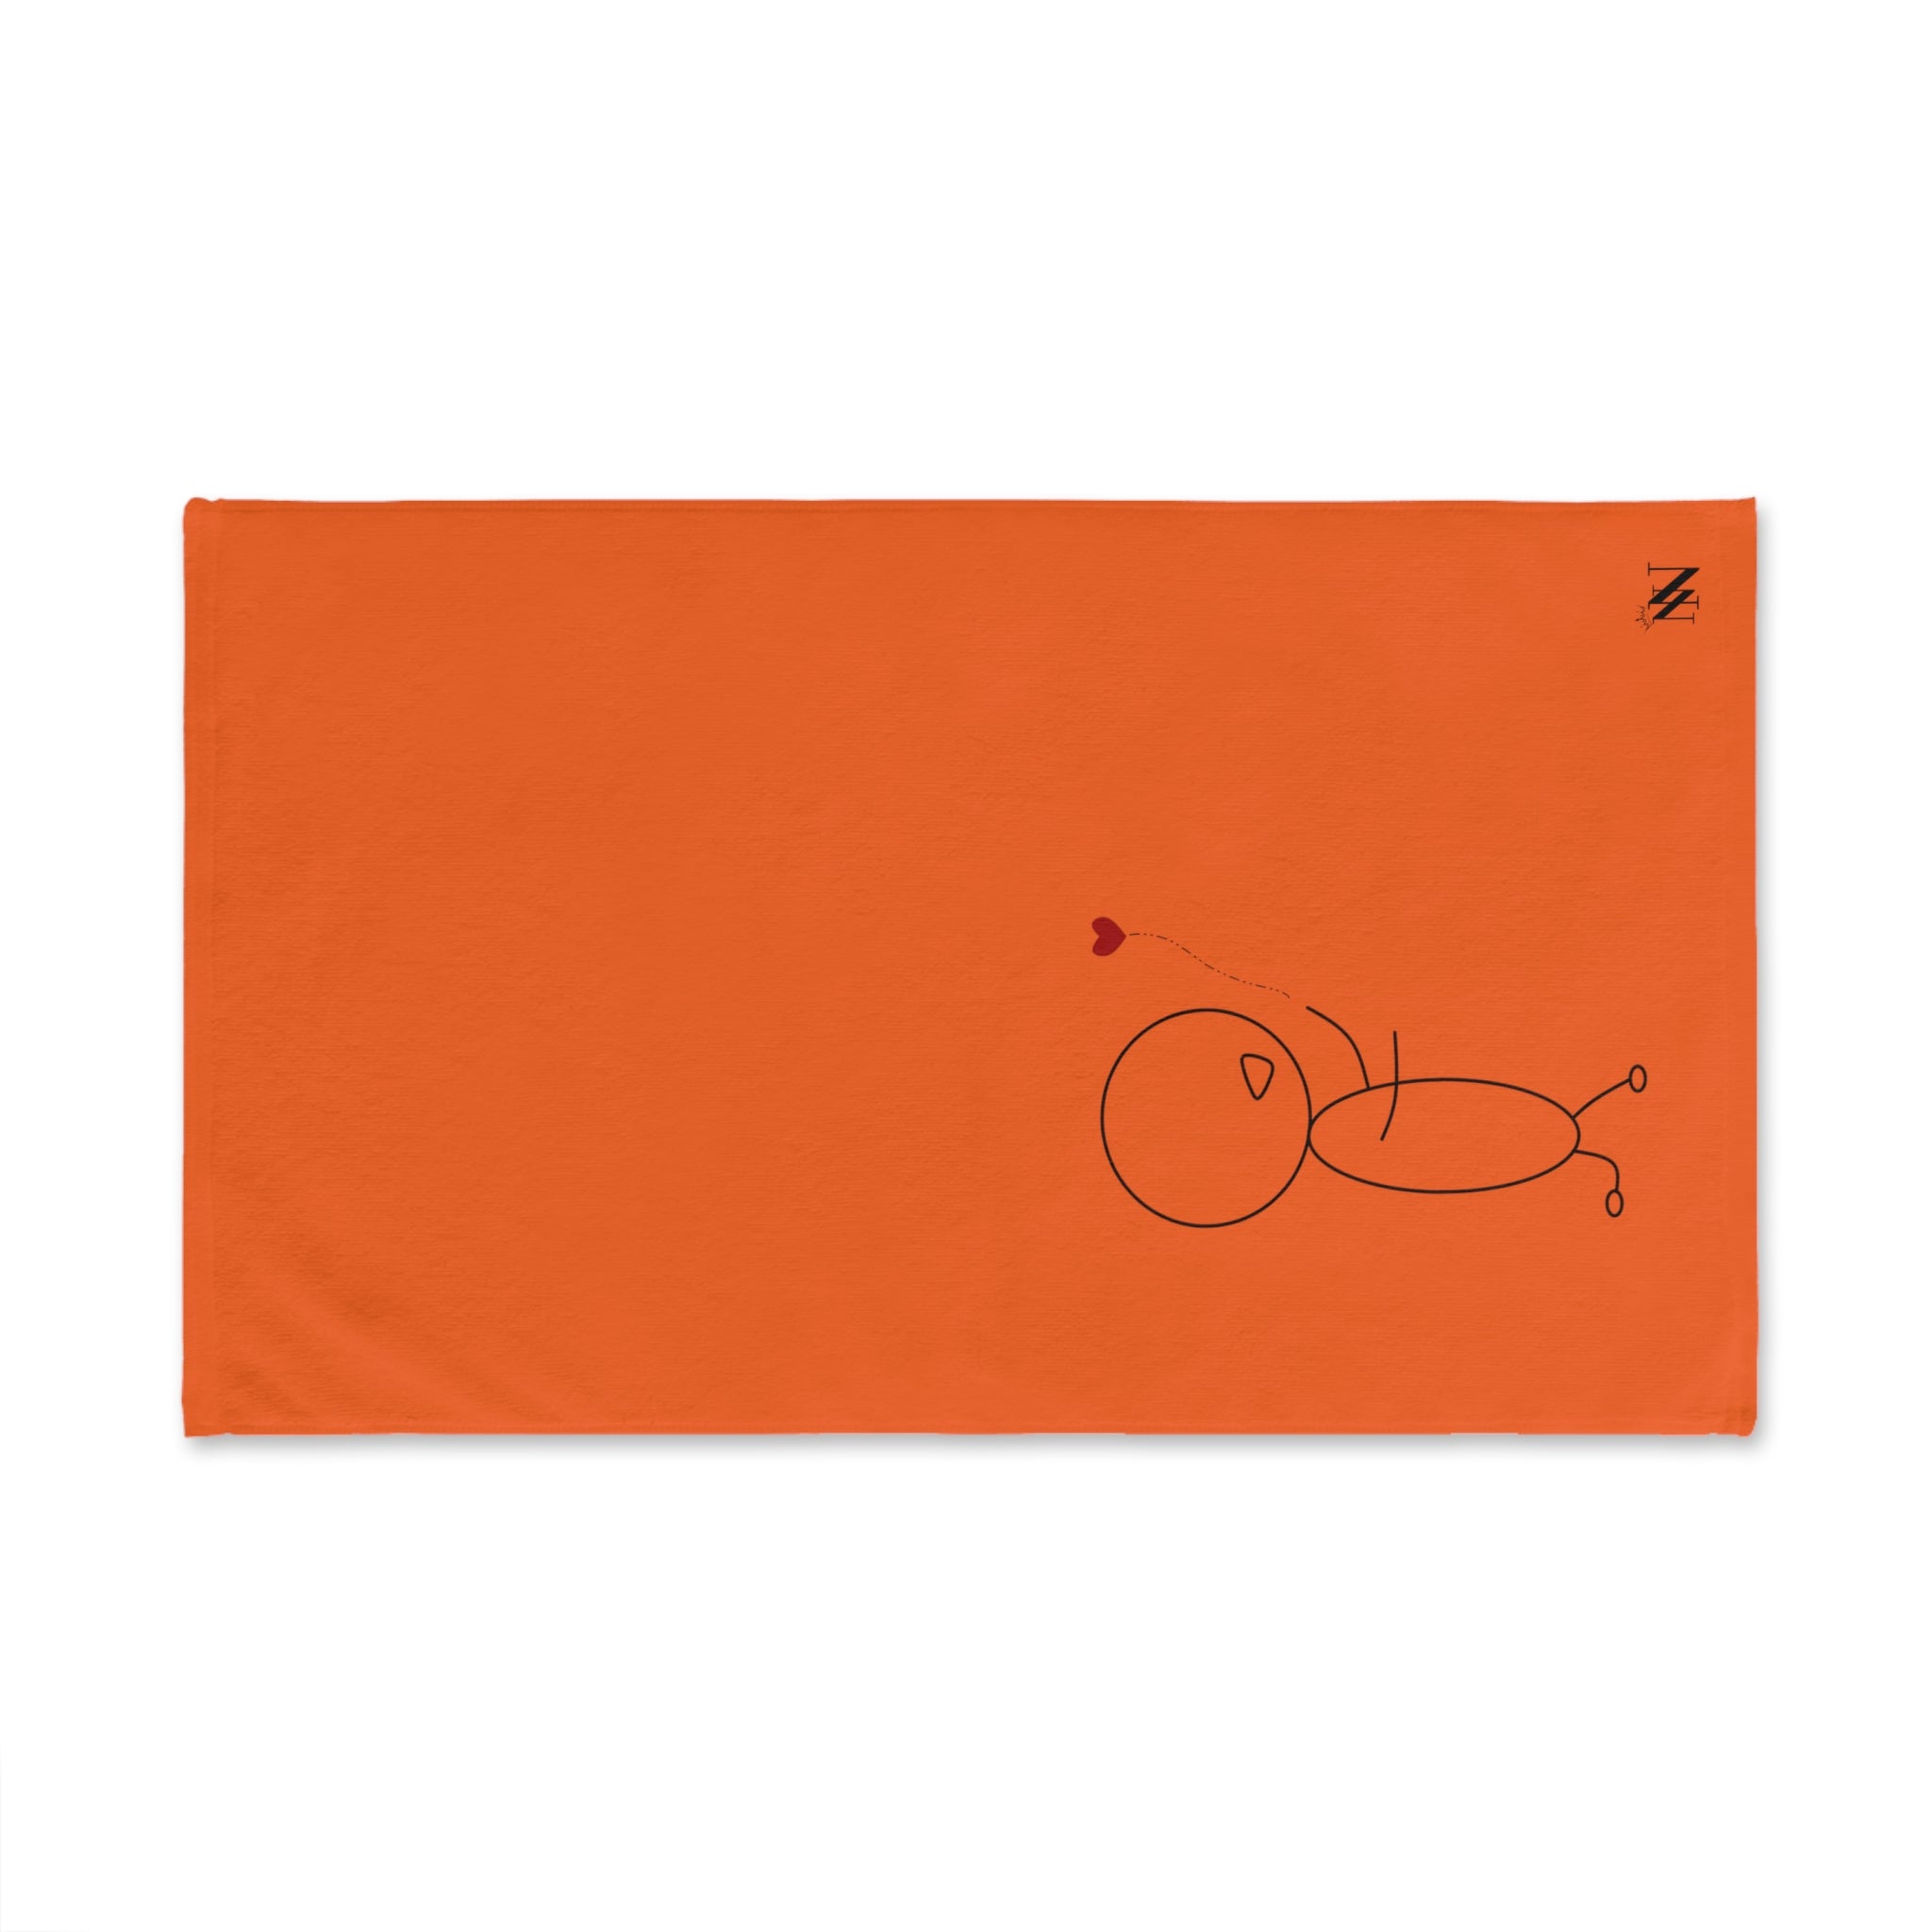 Stick Man Balloon Orange | Funny Gifts for Men - Gifts for Him - Birthday Gifts for Men, Him, Husband, Boyfriend, New Couple Gifts, Fathers & Valentines Day Gifts, Hand Towels NECTAR NAPKINS